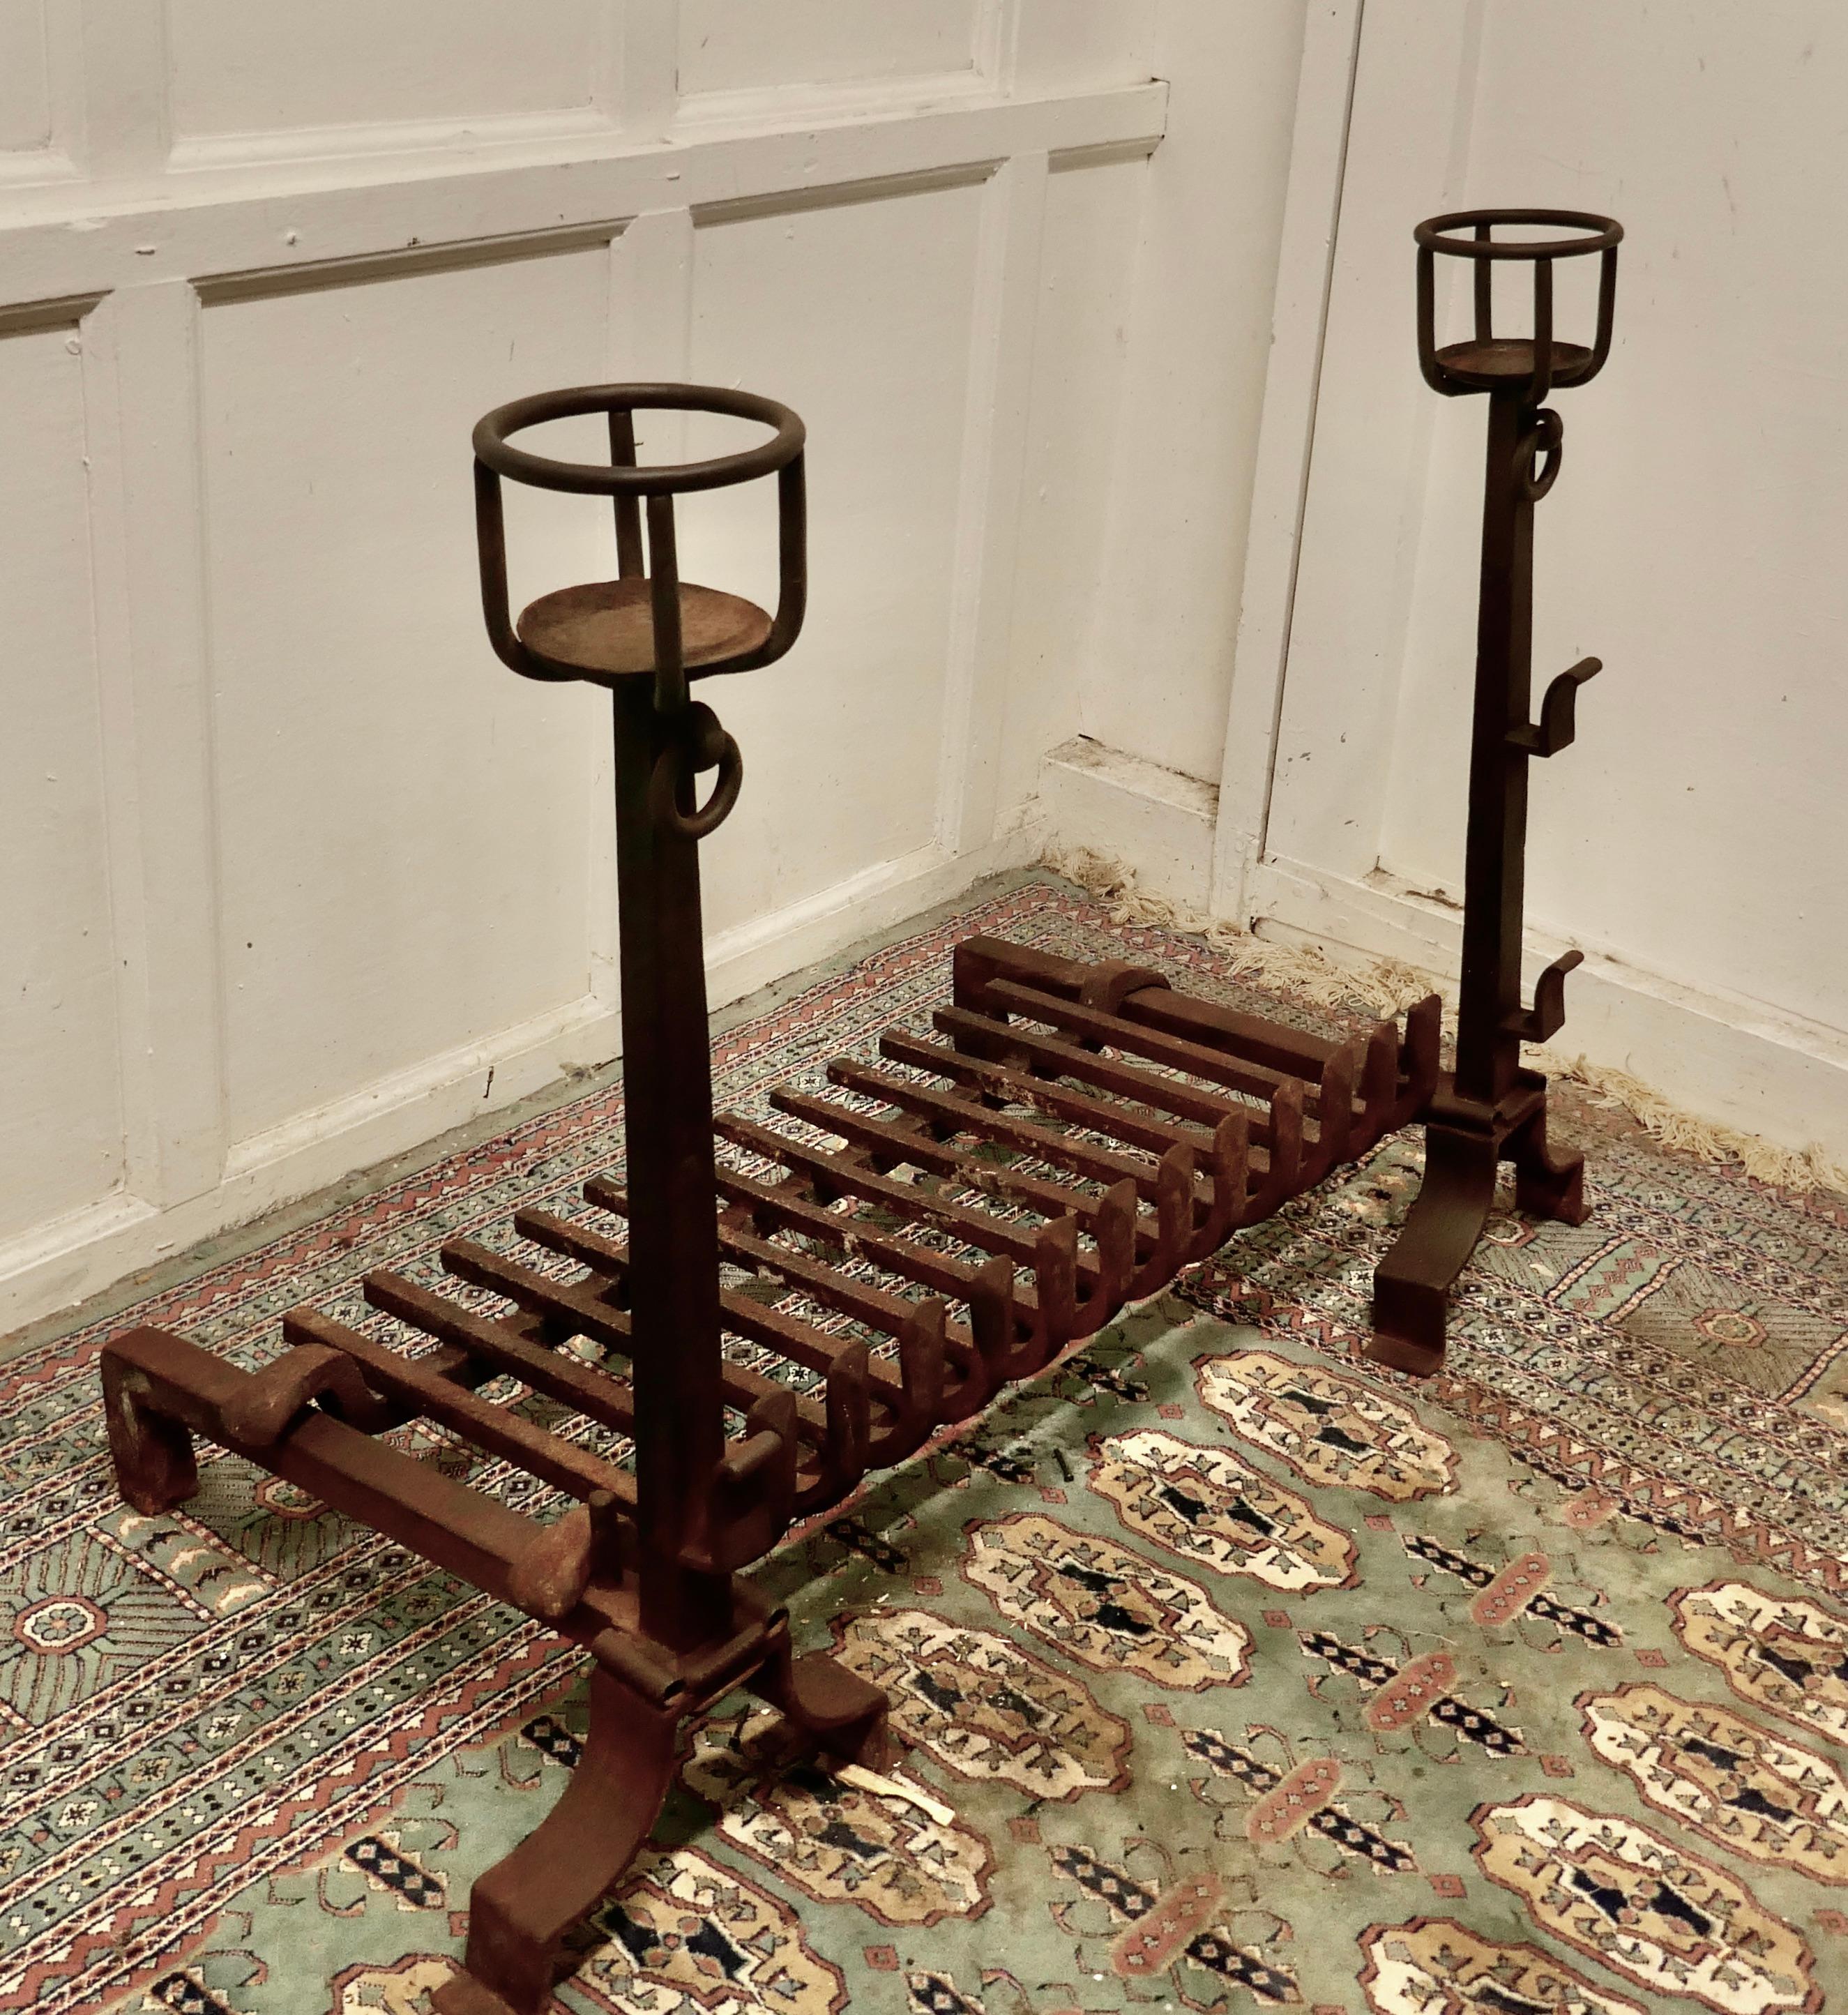 Very large early 19th century French fire grate set on iron andirons

This is a very large fire grate set on tall bowl Andirons, they are Blacksmith made with bowls to the top and spit rod carriers on the front, needless to say these are very